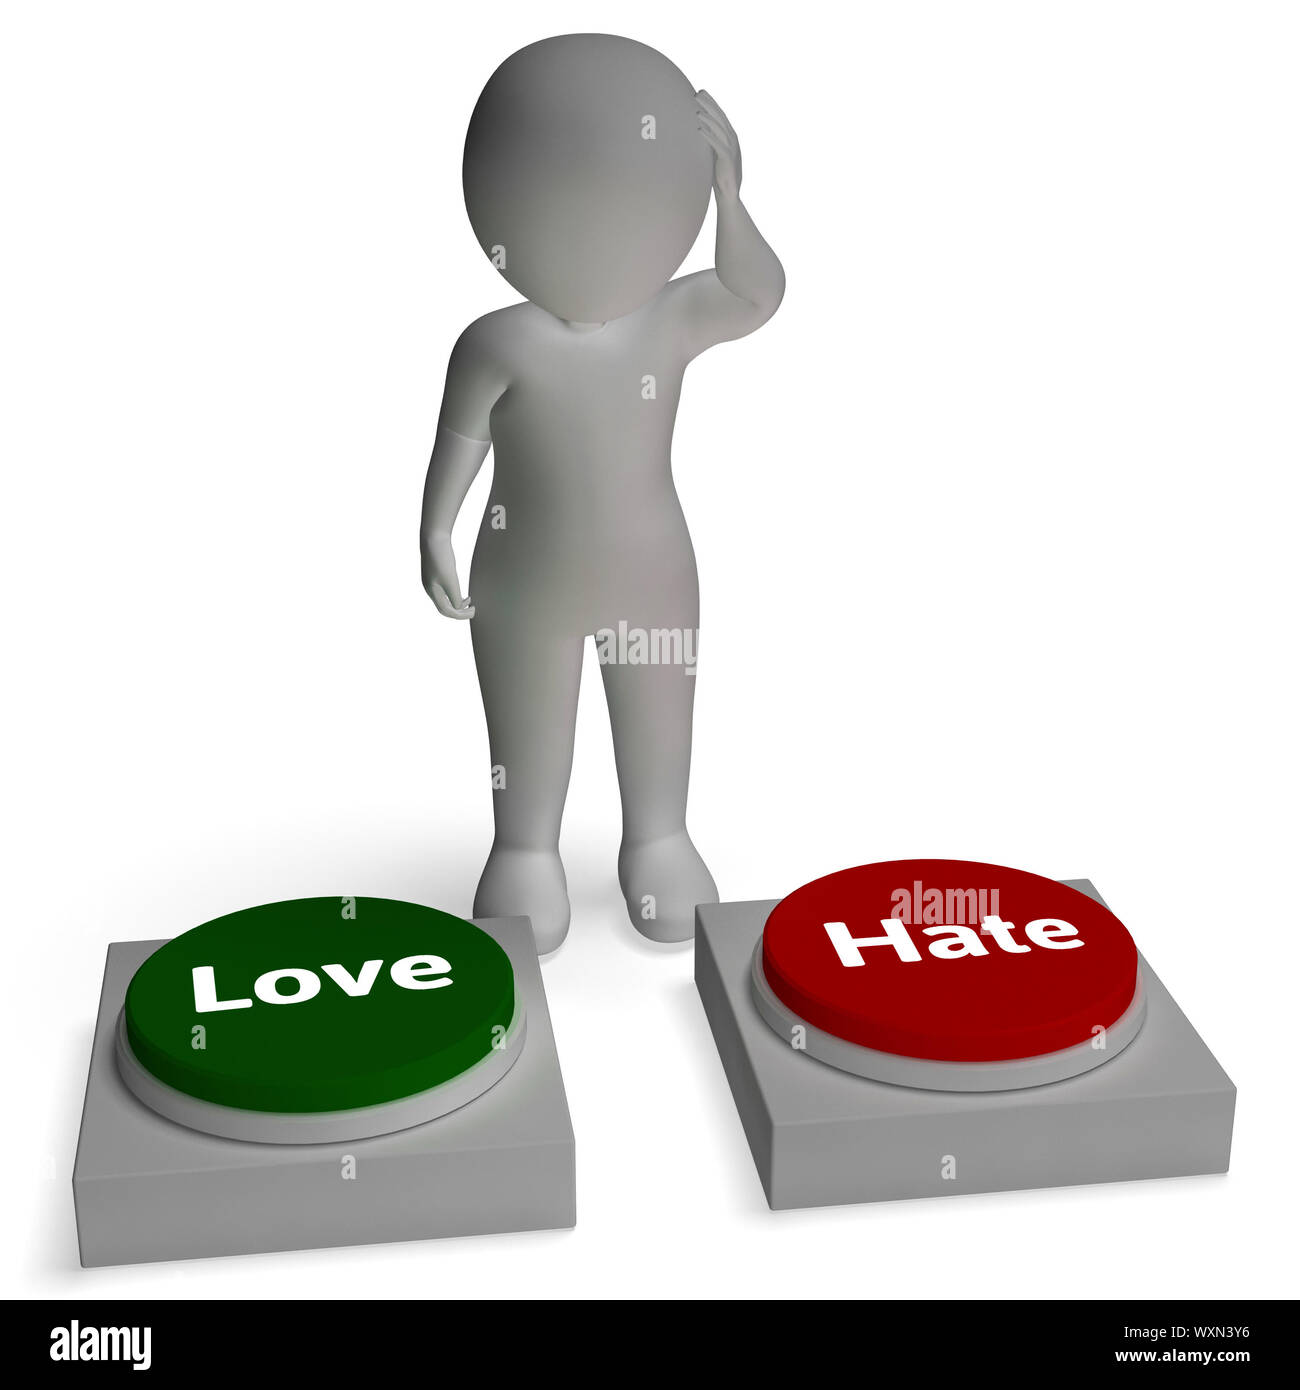 Love Hate Buttons Shows Loving And Hating Relationship Stock Photo